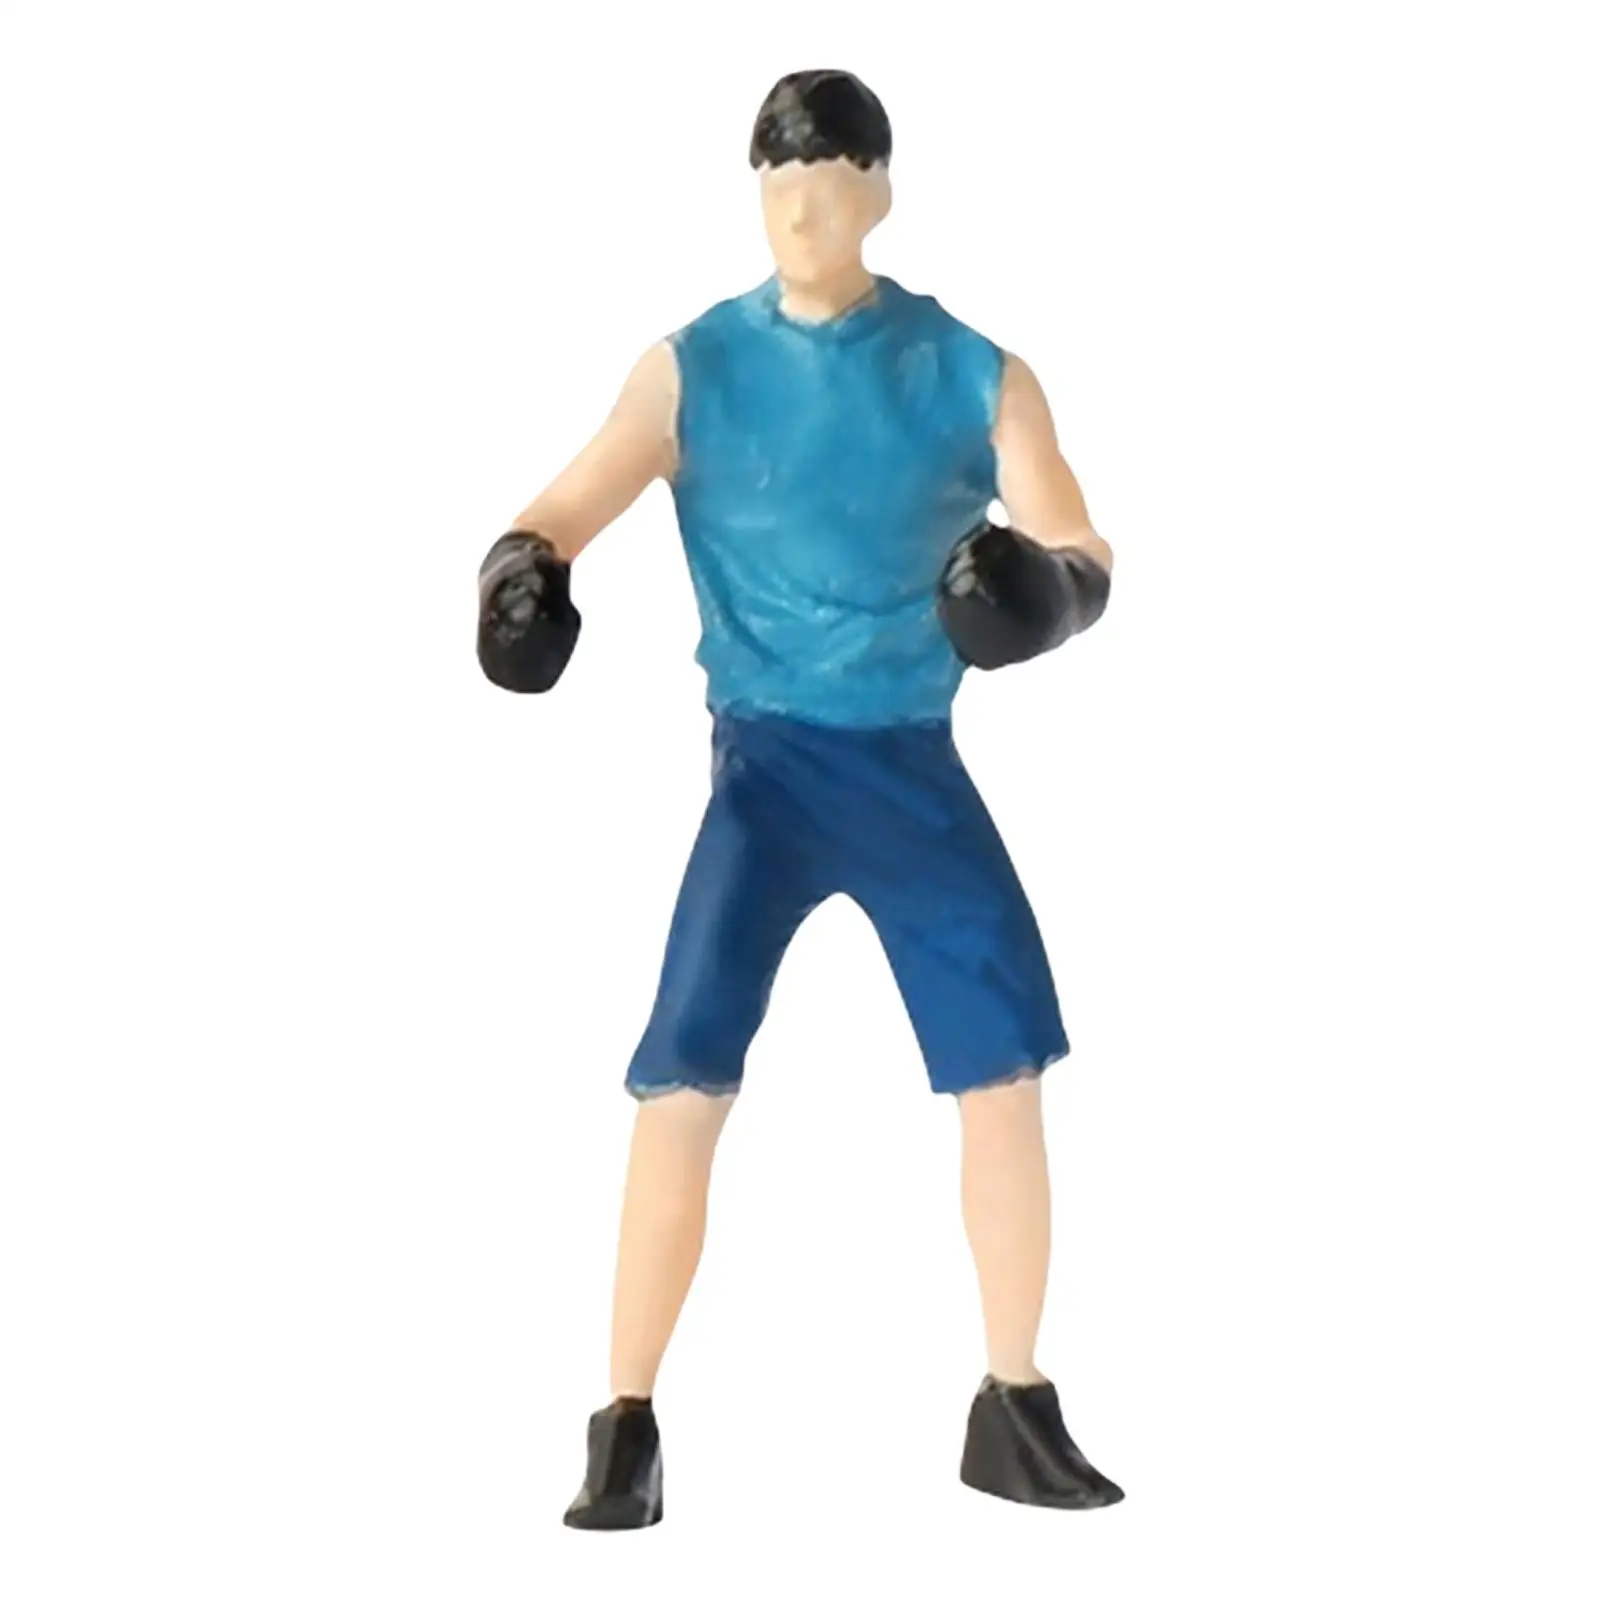 1:64 Scale Models Figurine Boxing Man People Figures Ornaments for Diorama